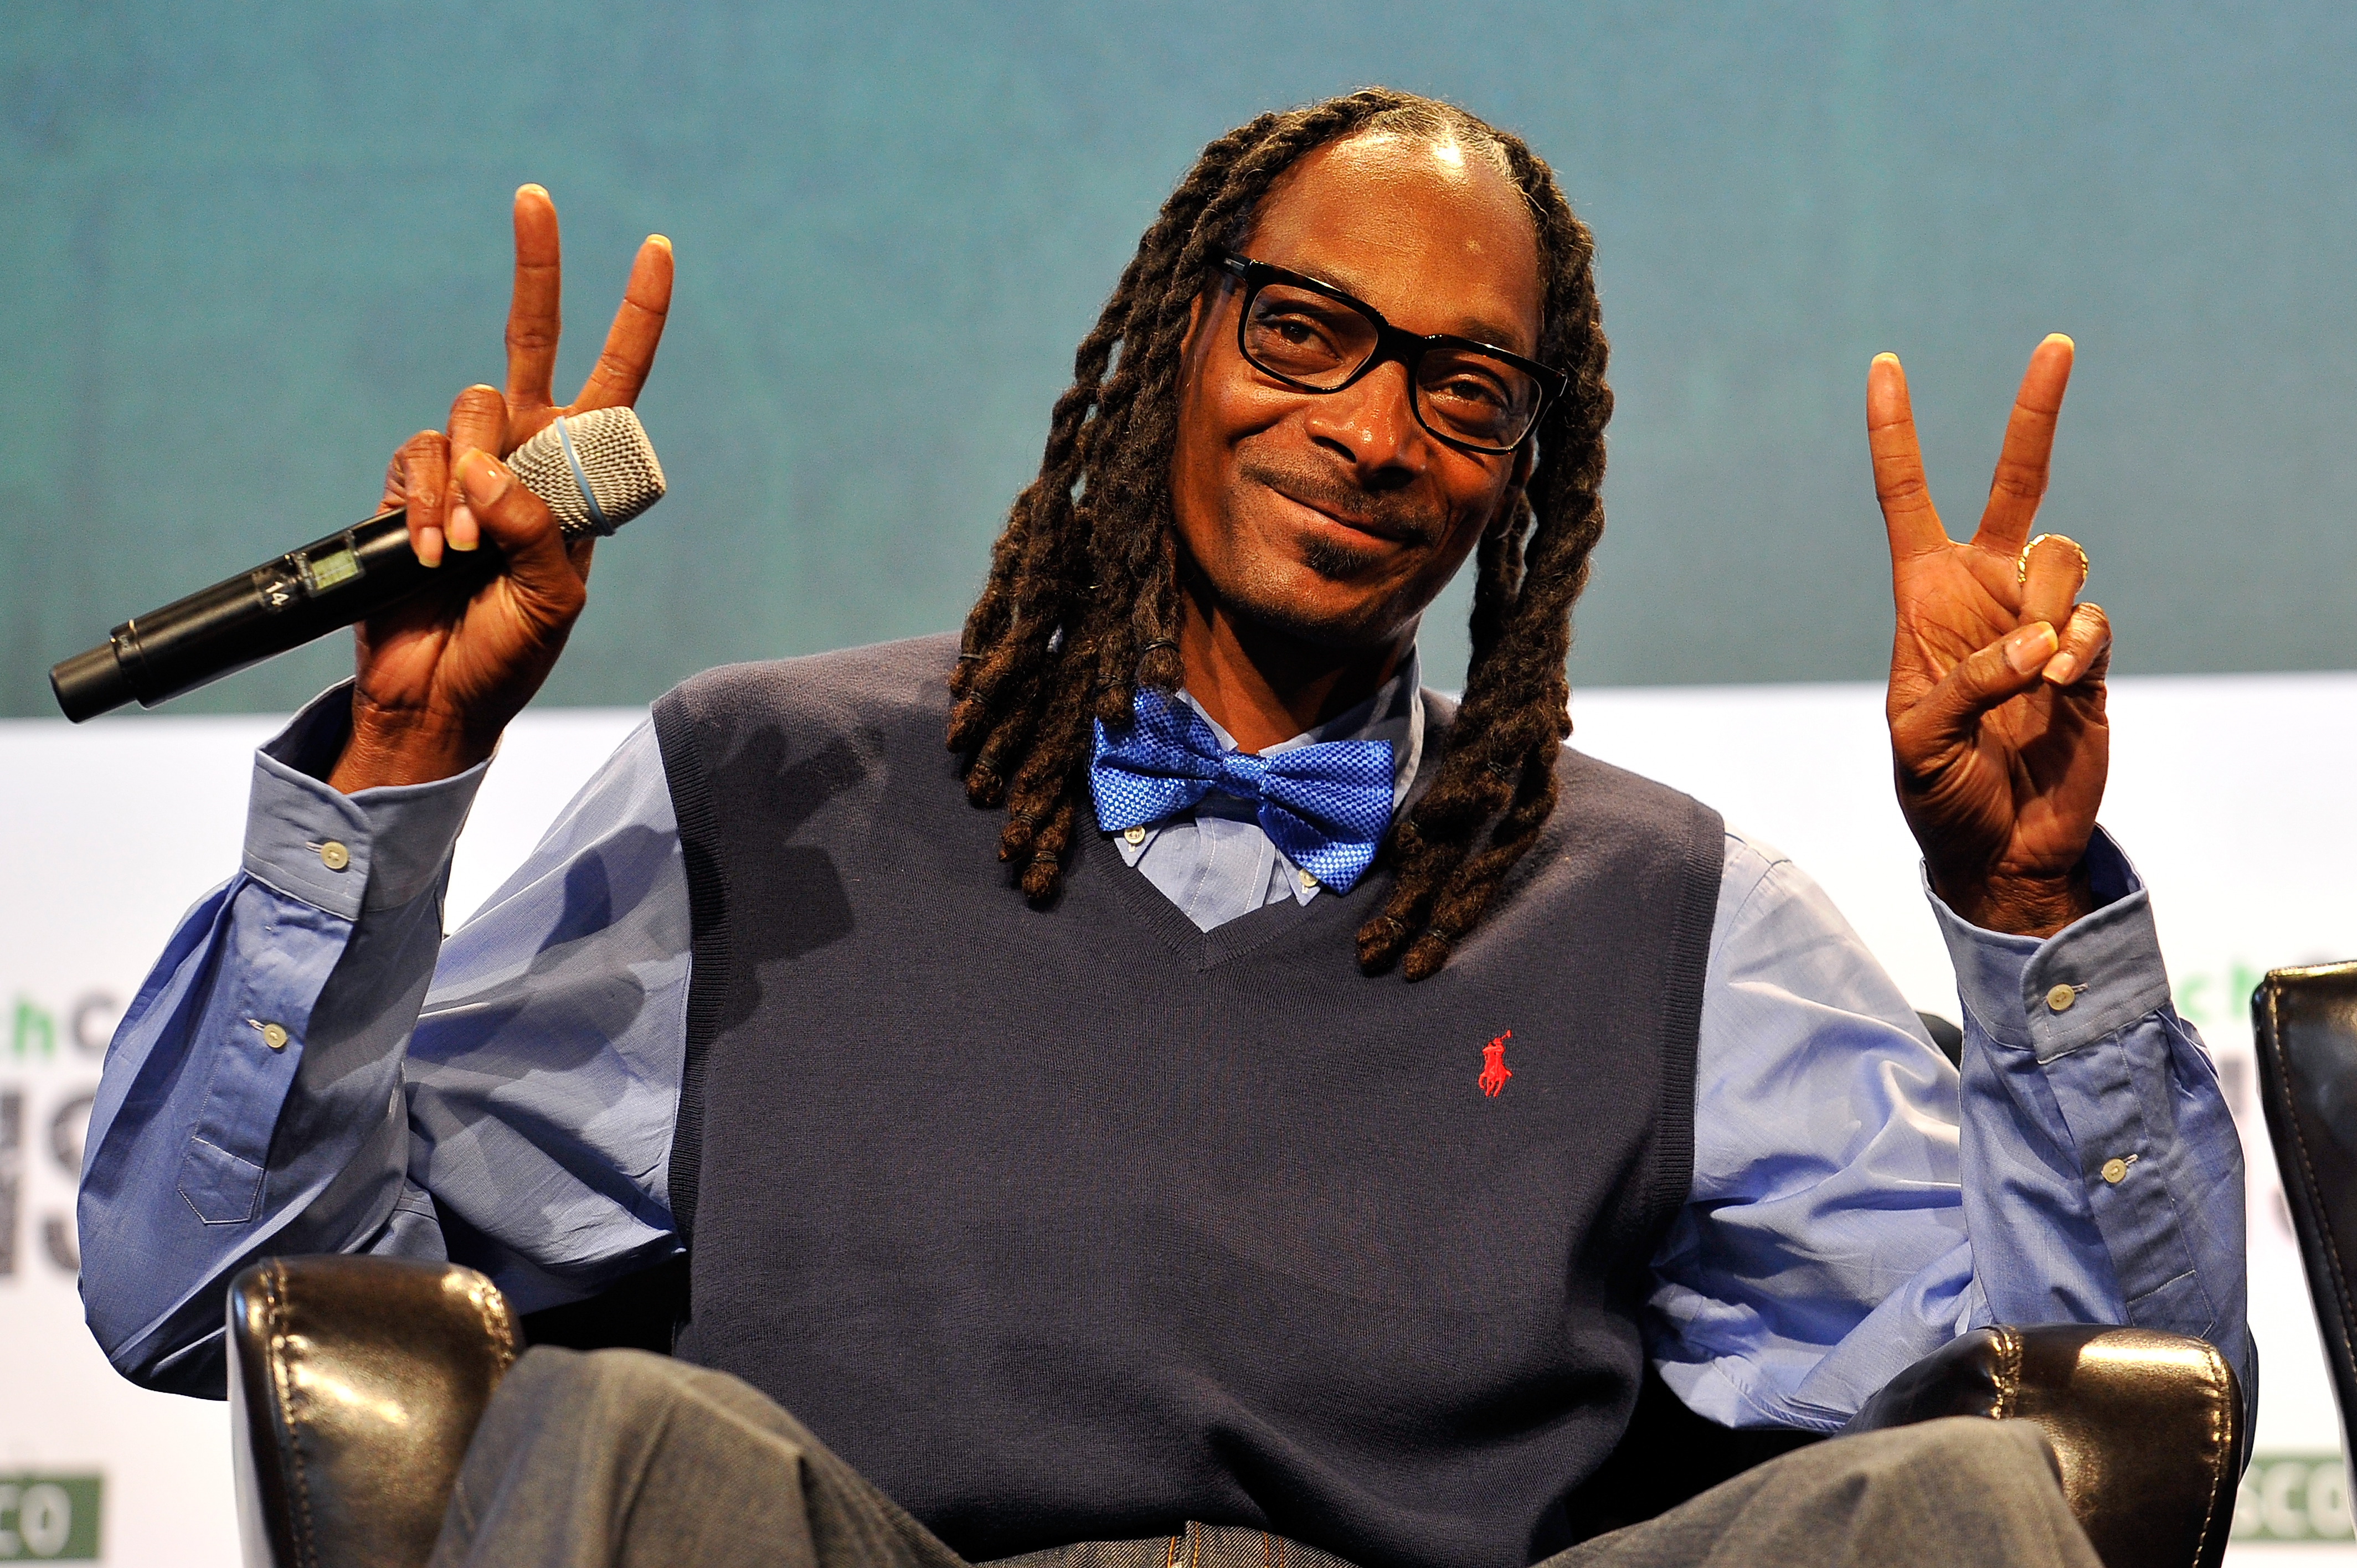 Snoop Dogg Says He Wasn’t Dissing Young Thug In “Moment I Feared” Video